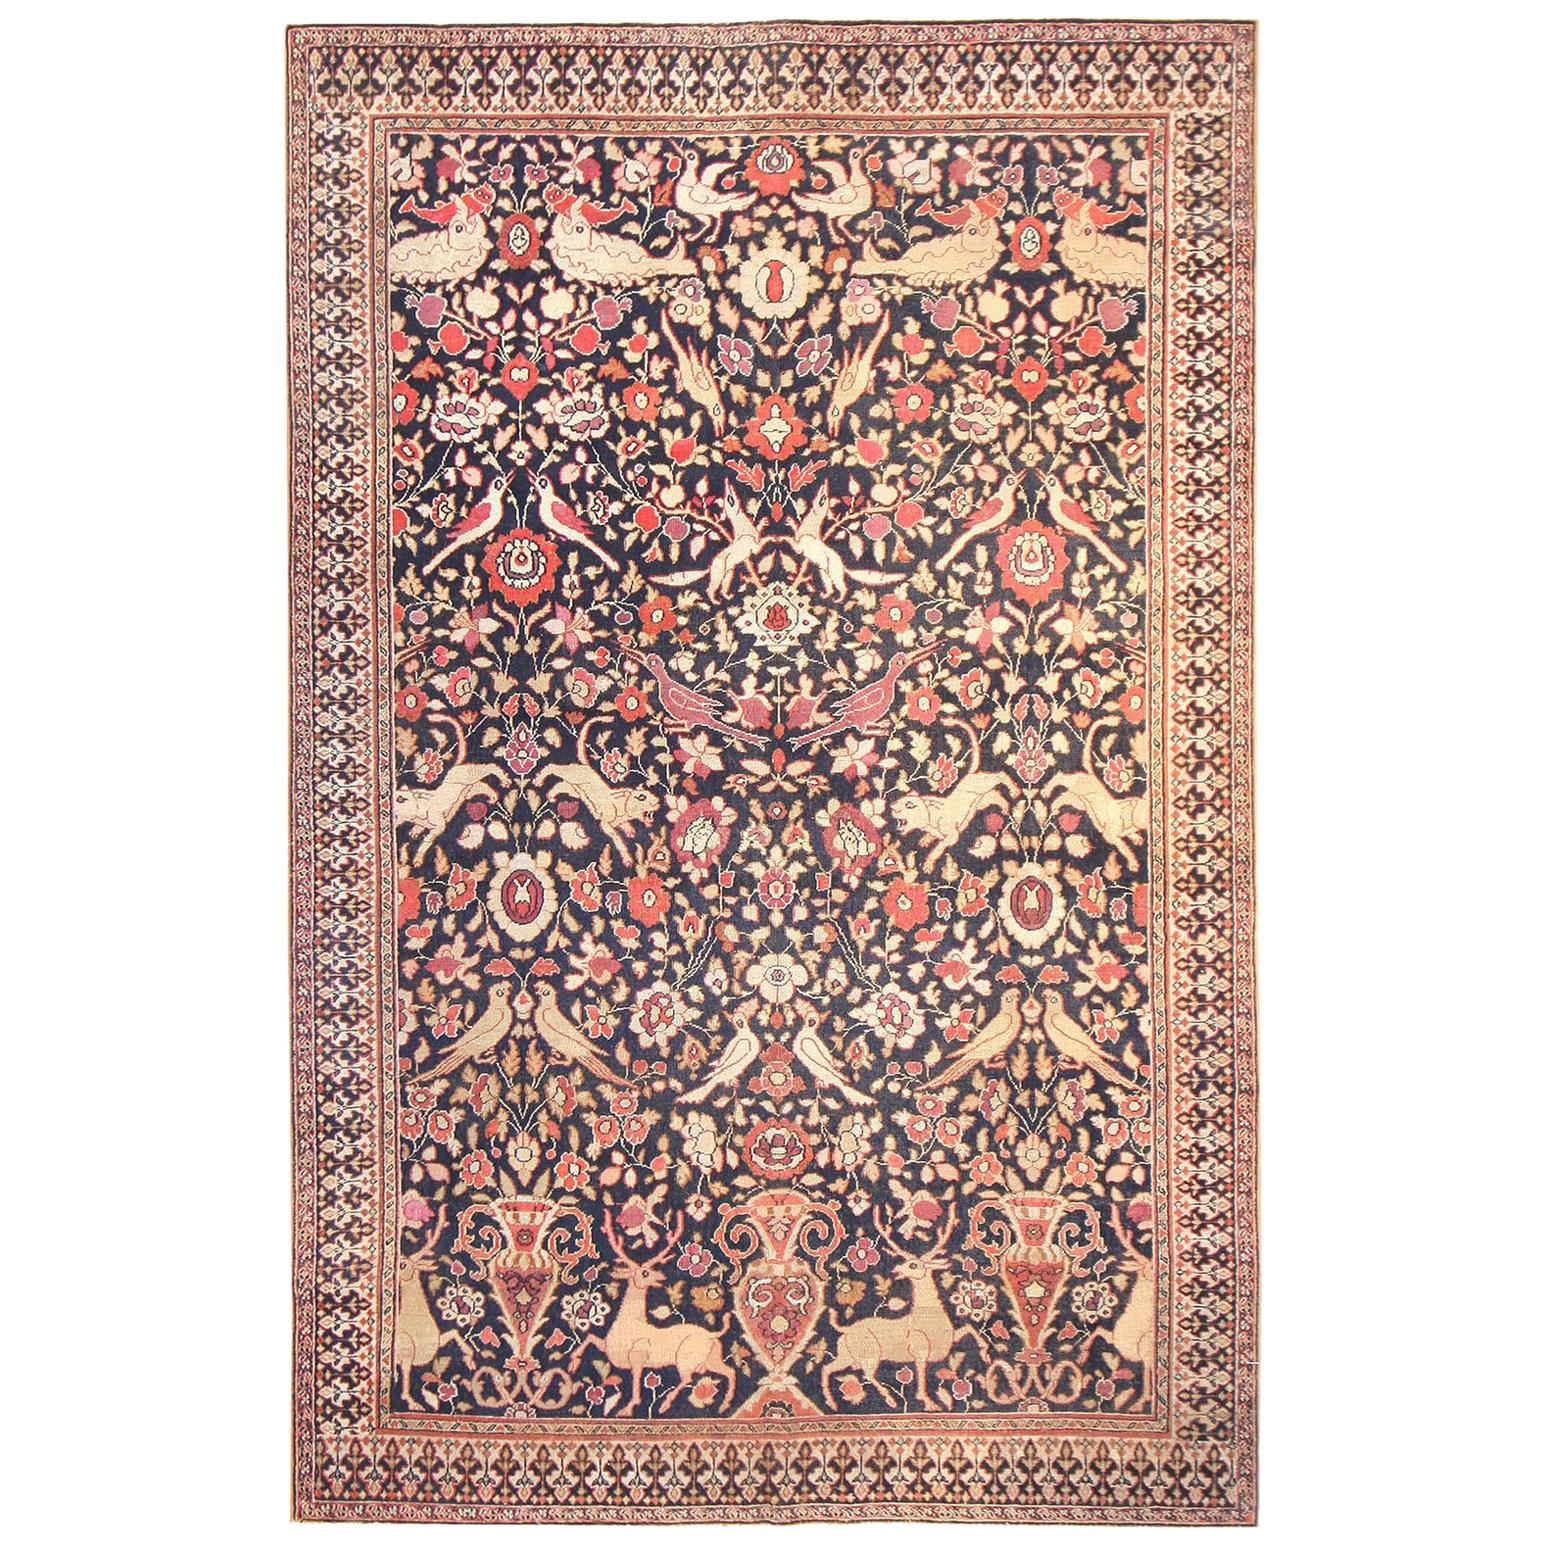 Antique Khorassan Persian Rug. Size: 5 ft 5 in x 8 ft 8 in (1.65 m x 2.64 m)